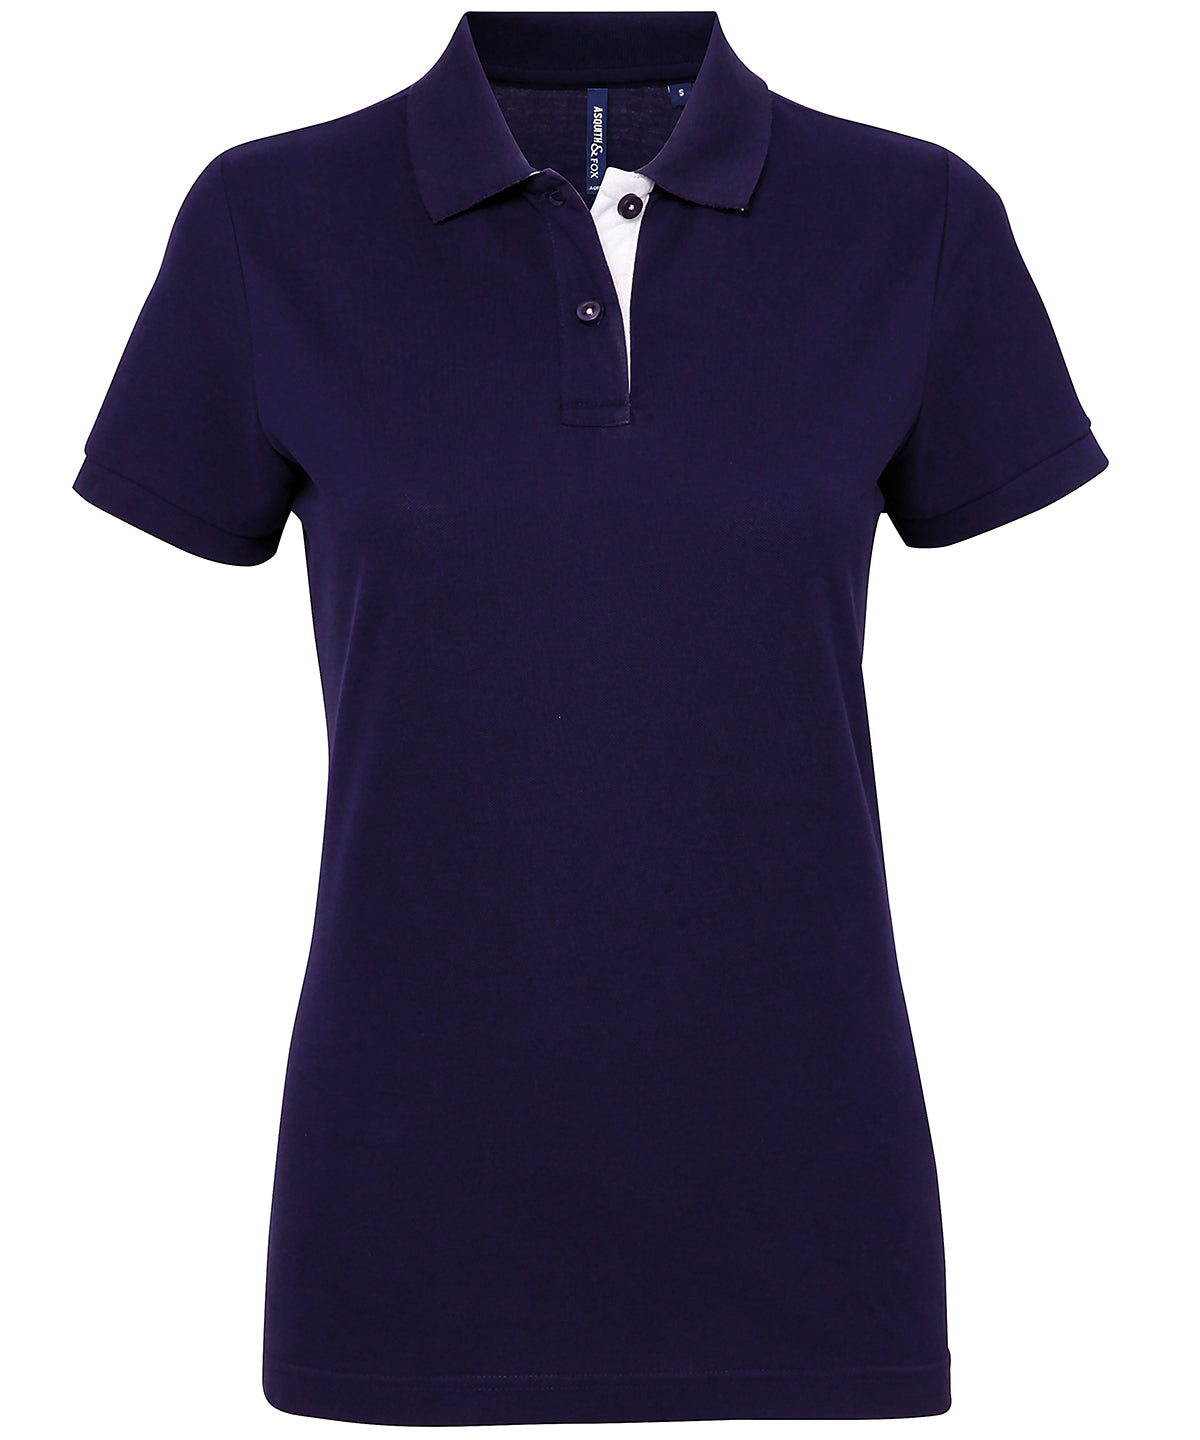 Personalised Polo Shirts - Black Asquith & Fox Women's contrast polo